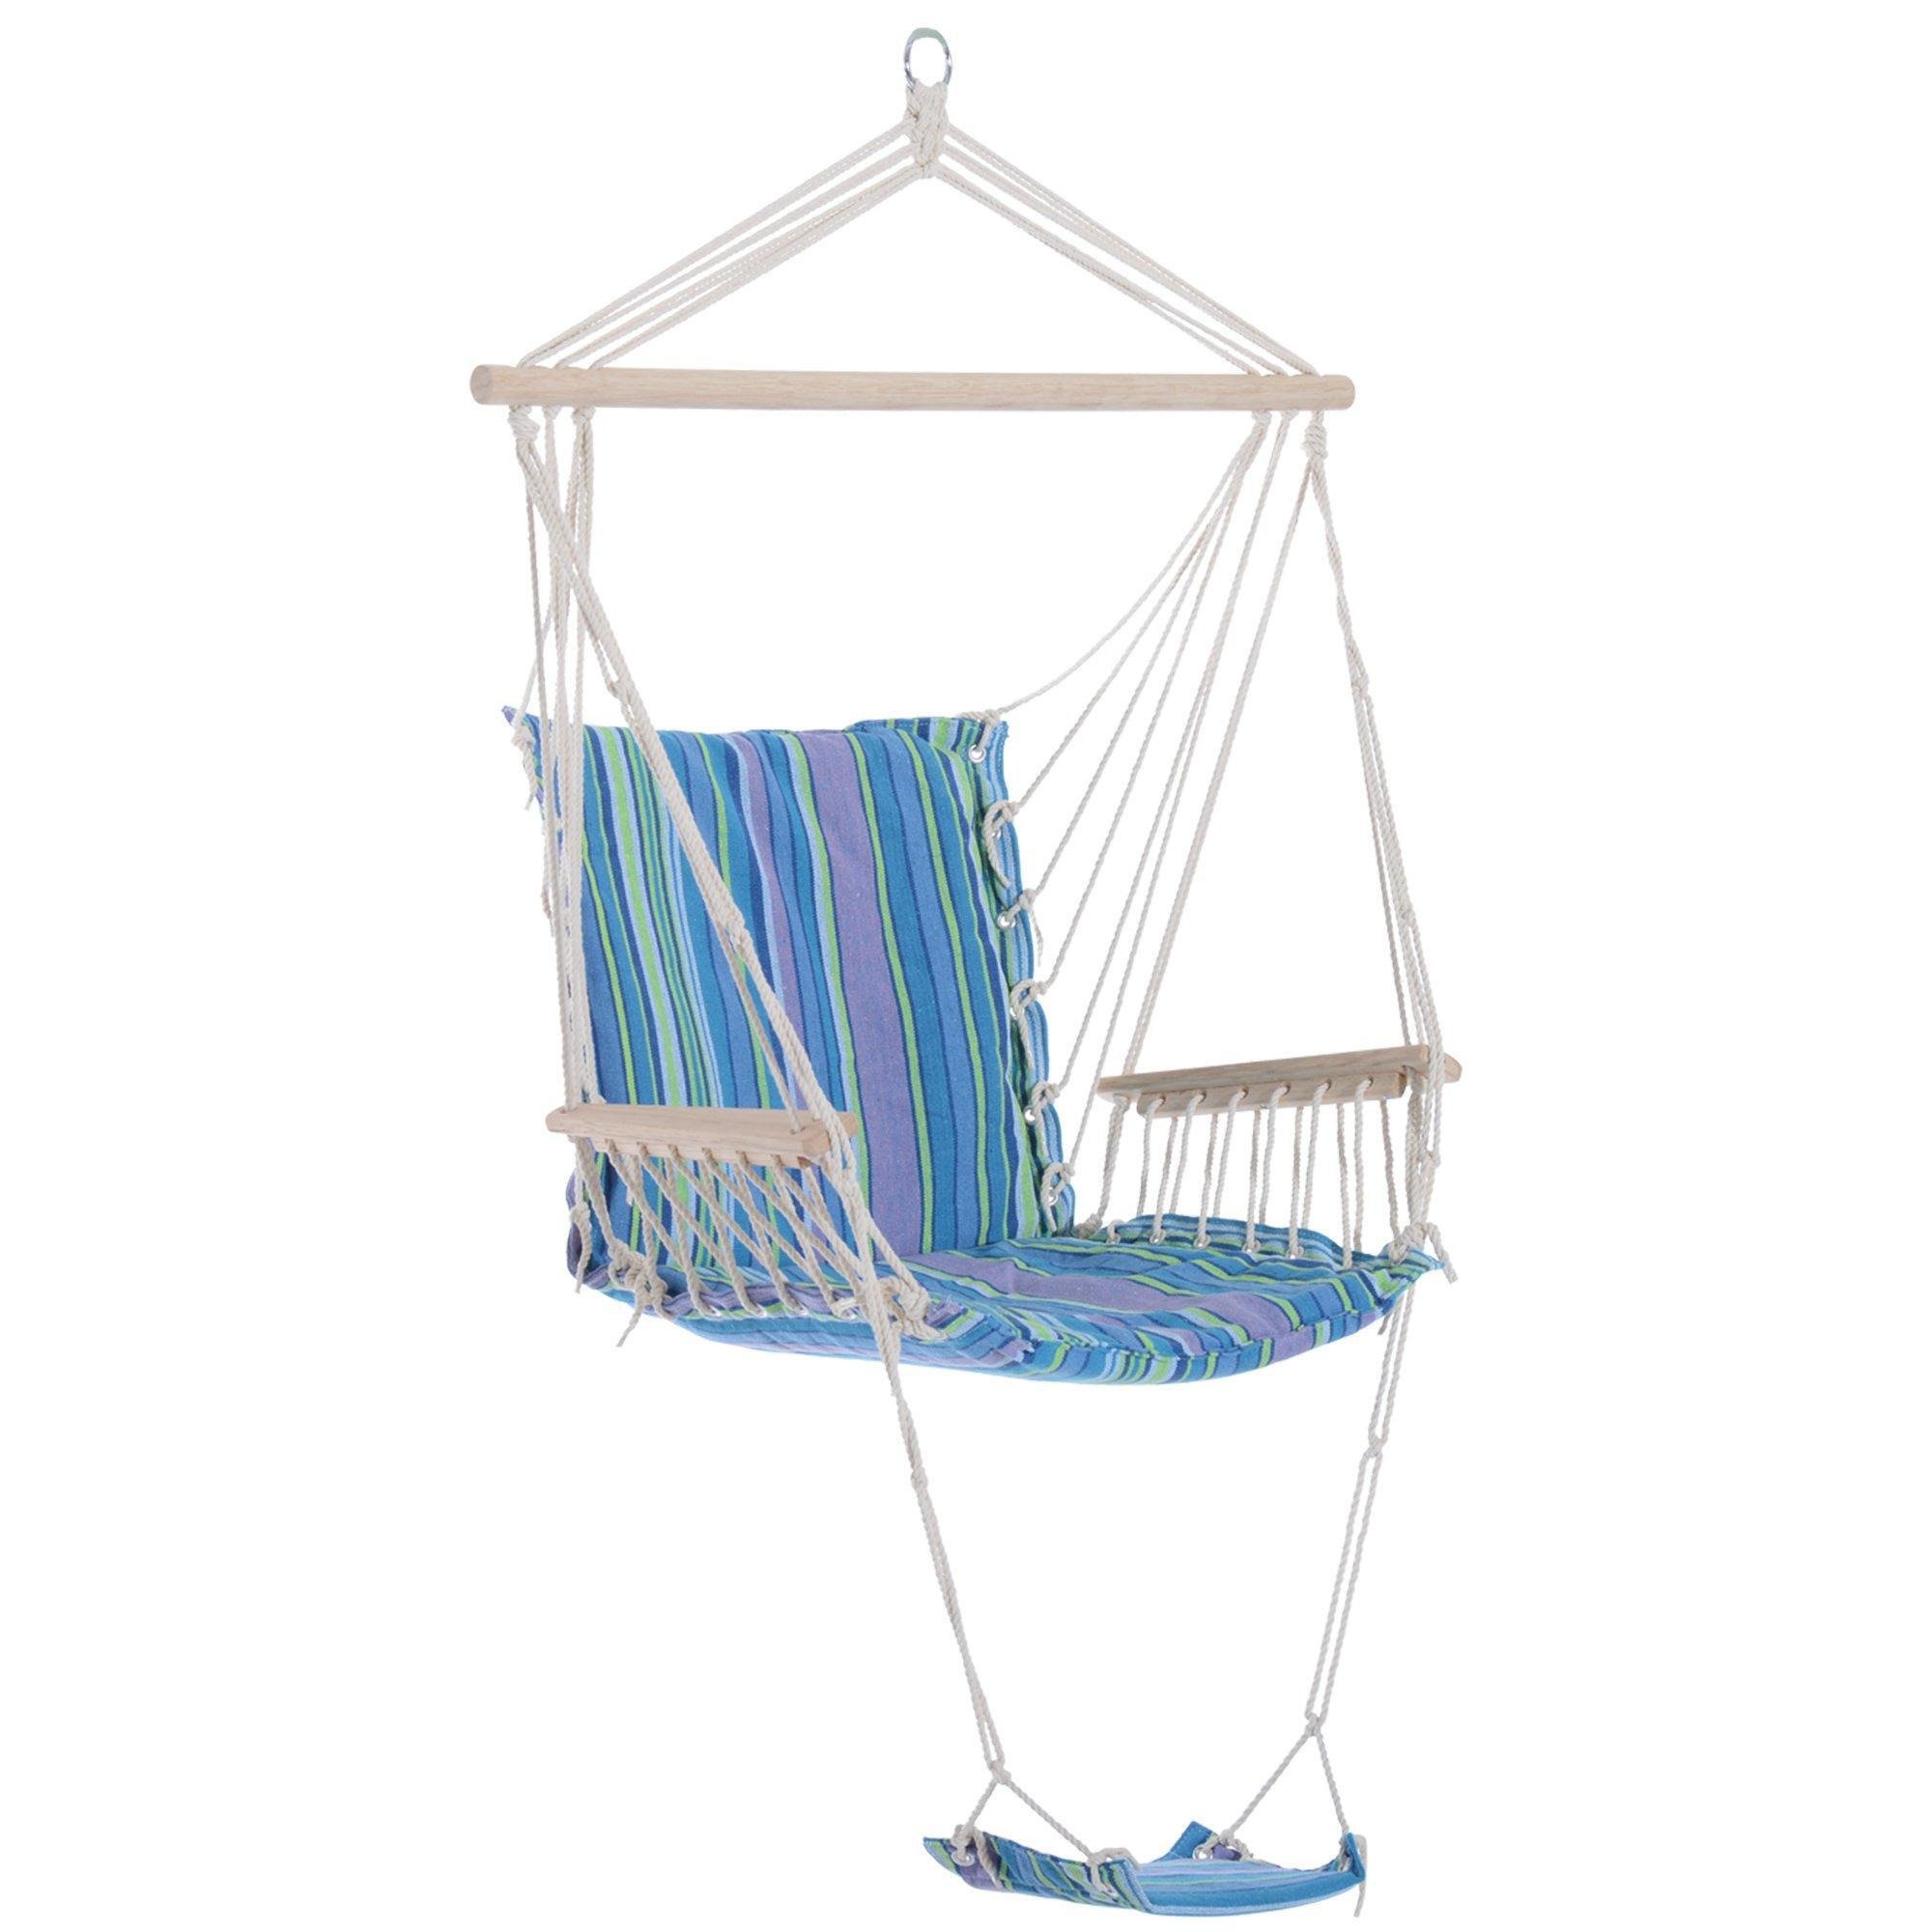 Garden Hammock with Footrest Armrest Patio Swing Seat Hanging Rope - image 1